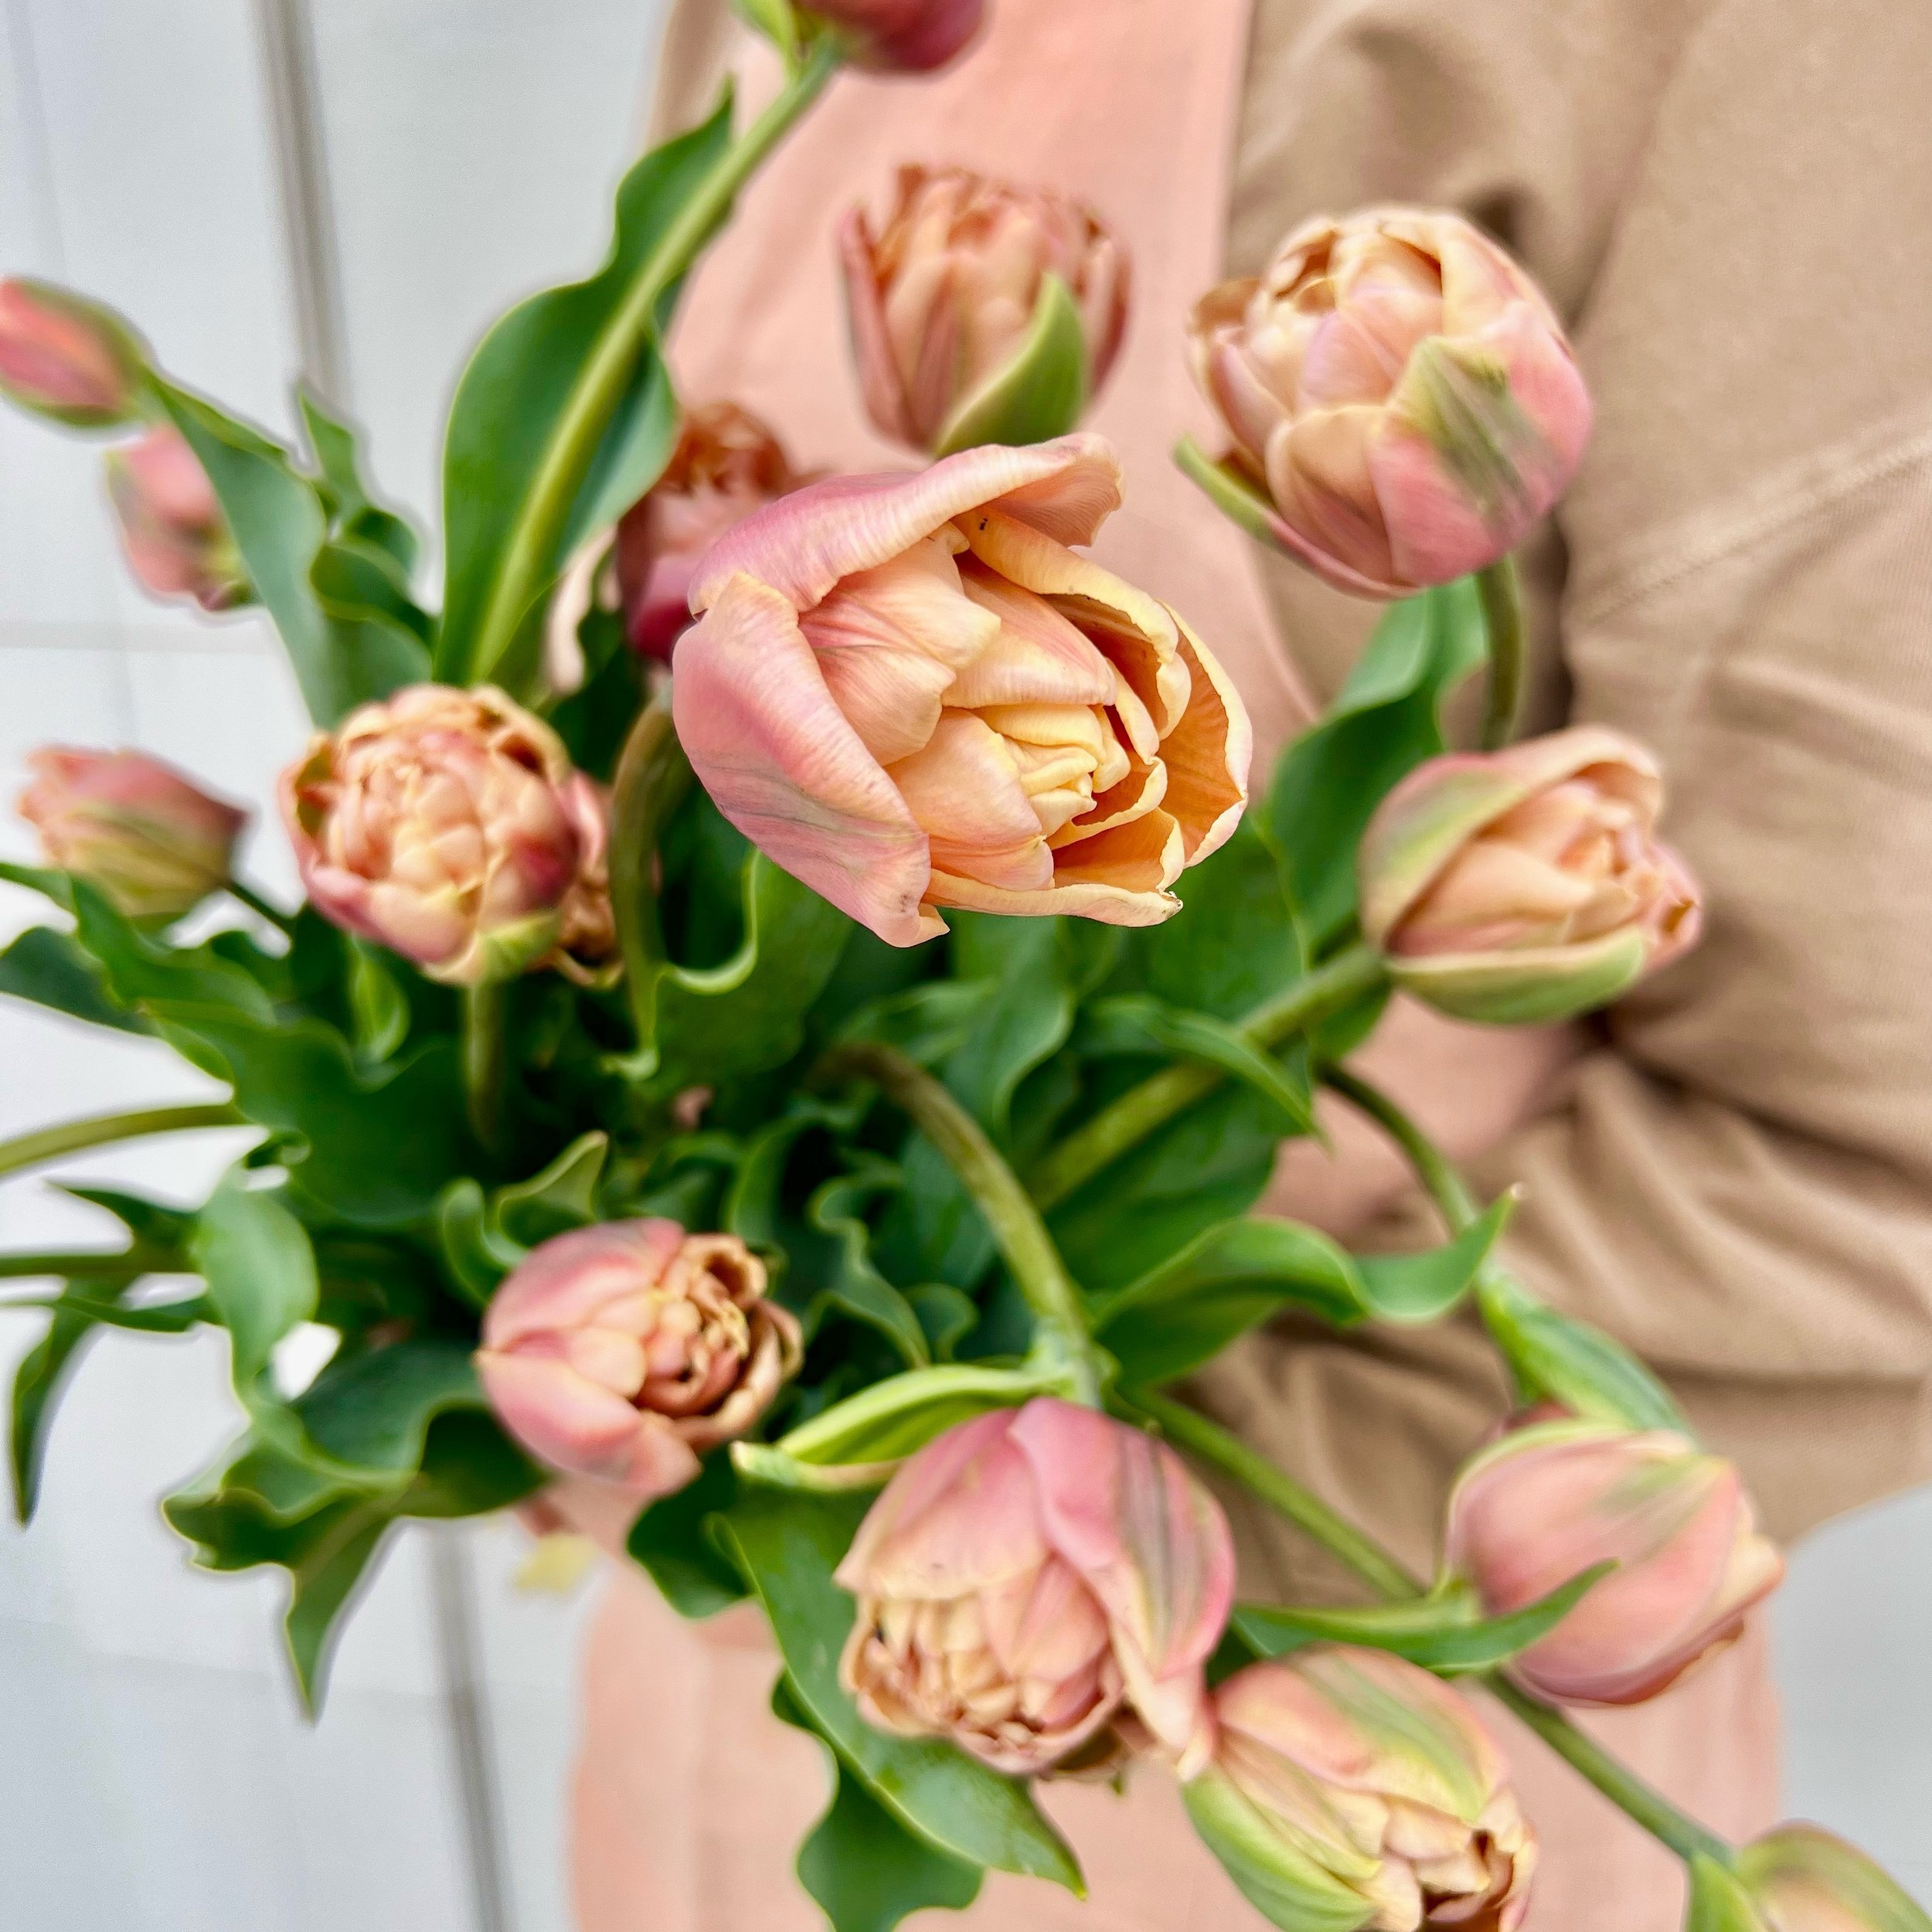 MOTHERS DAY HOURS : MAY 10&bull; 11&bull;12 { 10am-4pm}
💗💗💗
Specialty Tulips in Store!! 
&bull;
Or find some
@theroomcollection 
@elevate.hairstudio pop up market MAY 11

We also have a ton of wonderful artisans that will be in the shop all summer